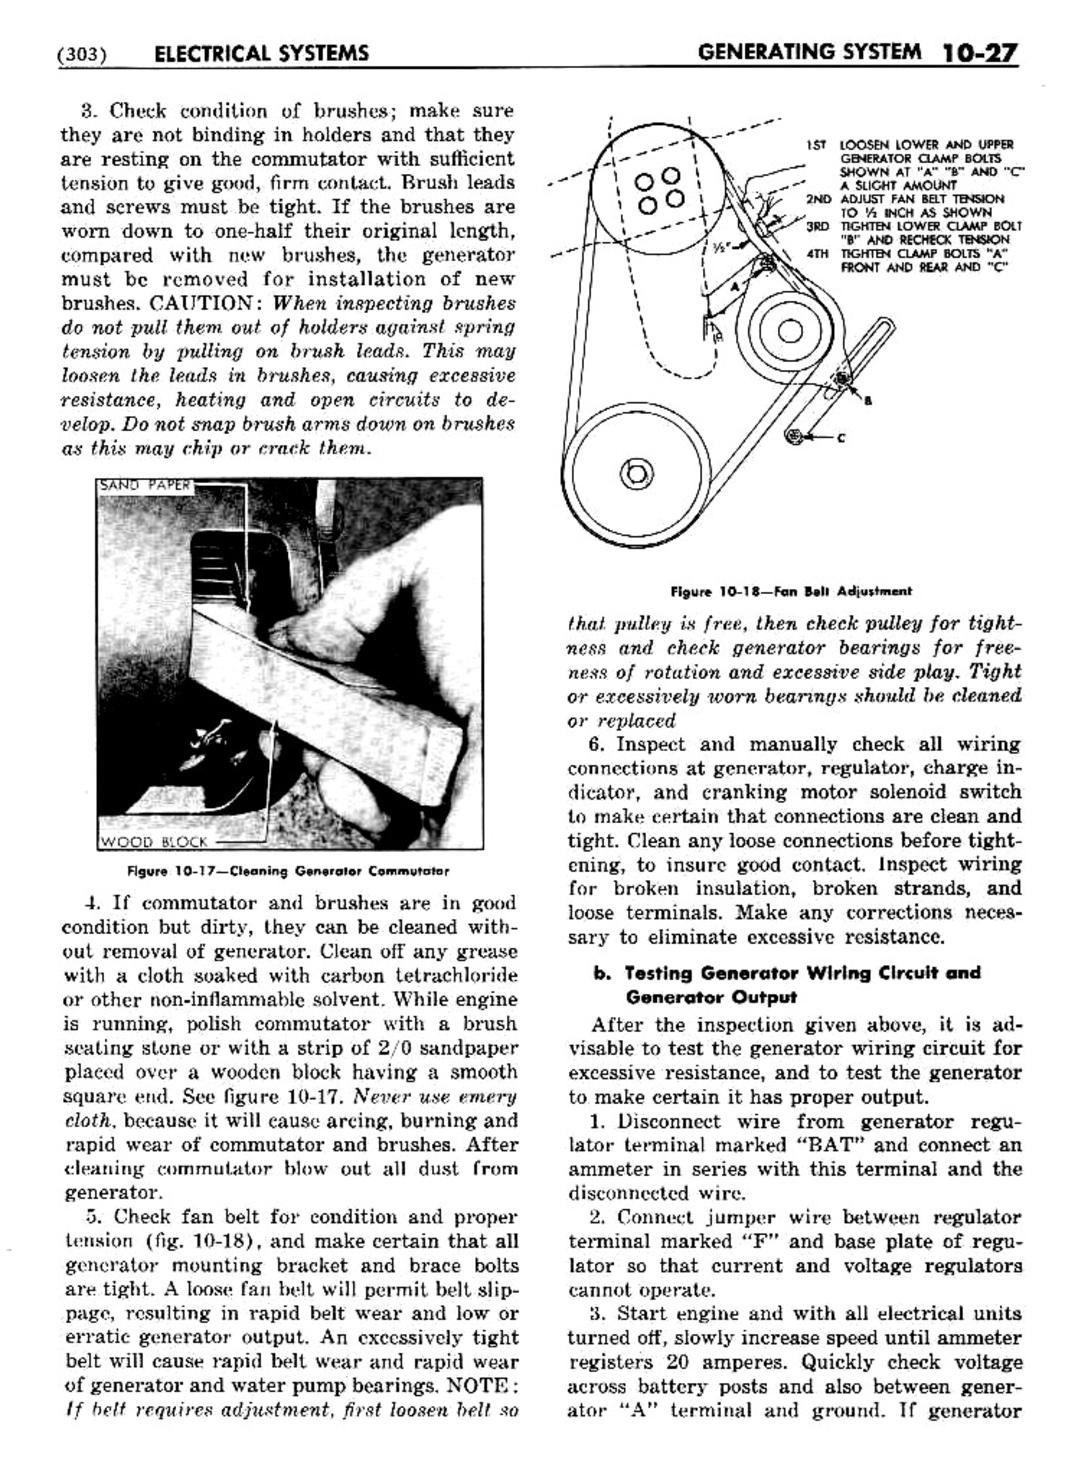 n_11 1948 Buick Shop Manual - Electrical Systems-027-027.jpg